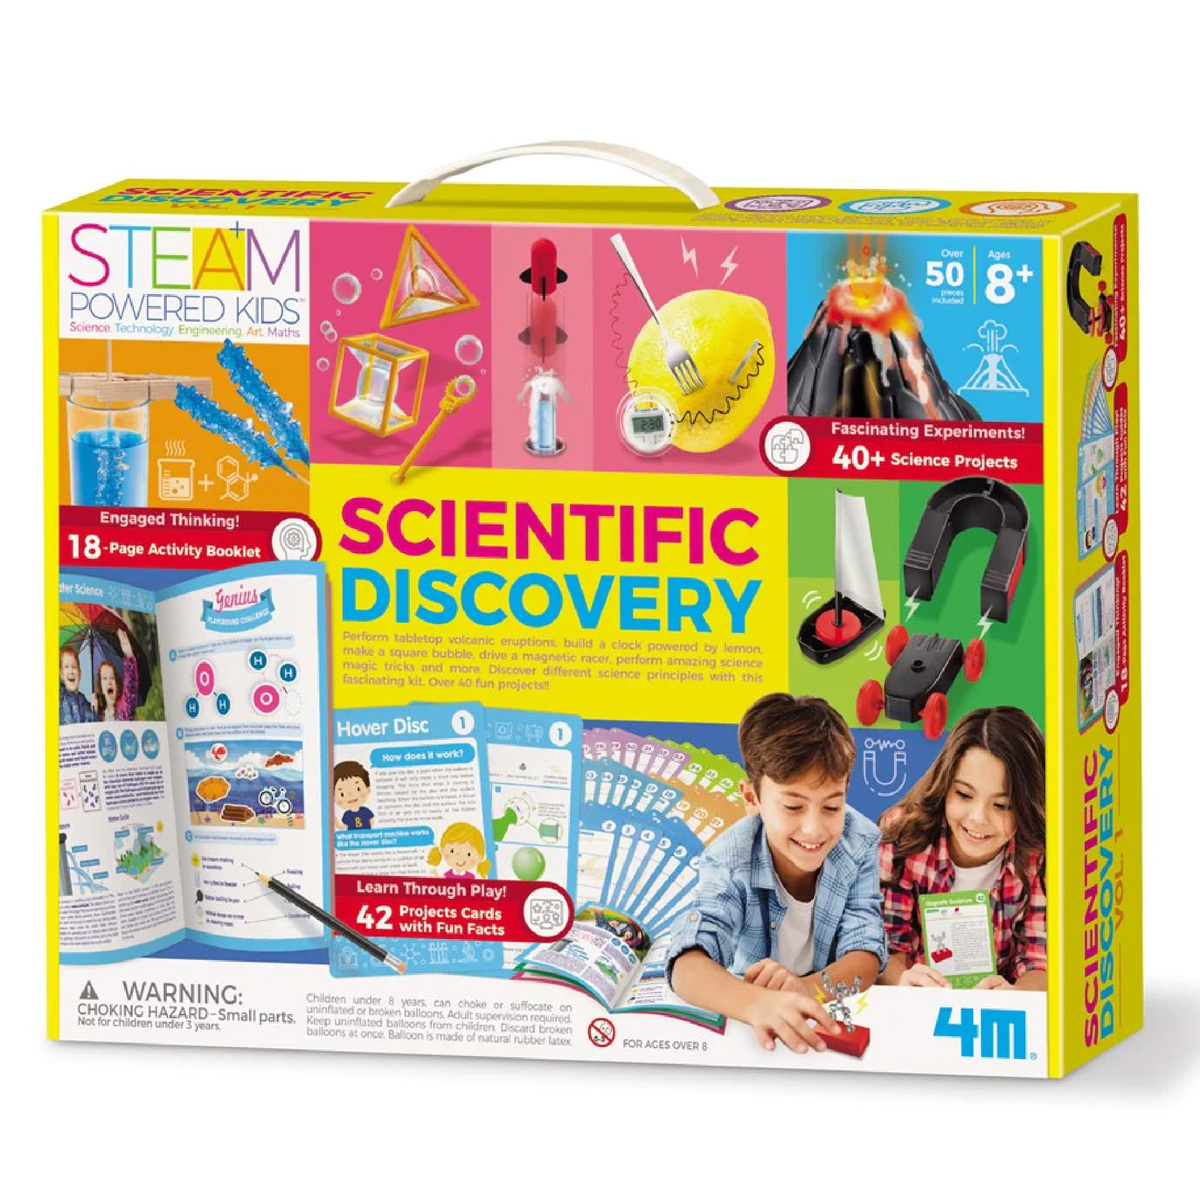 4M STEAM Powered Kids Scientific Discovery, 01711